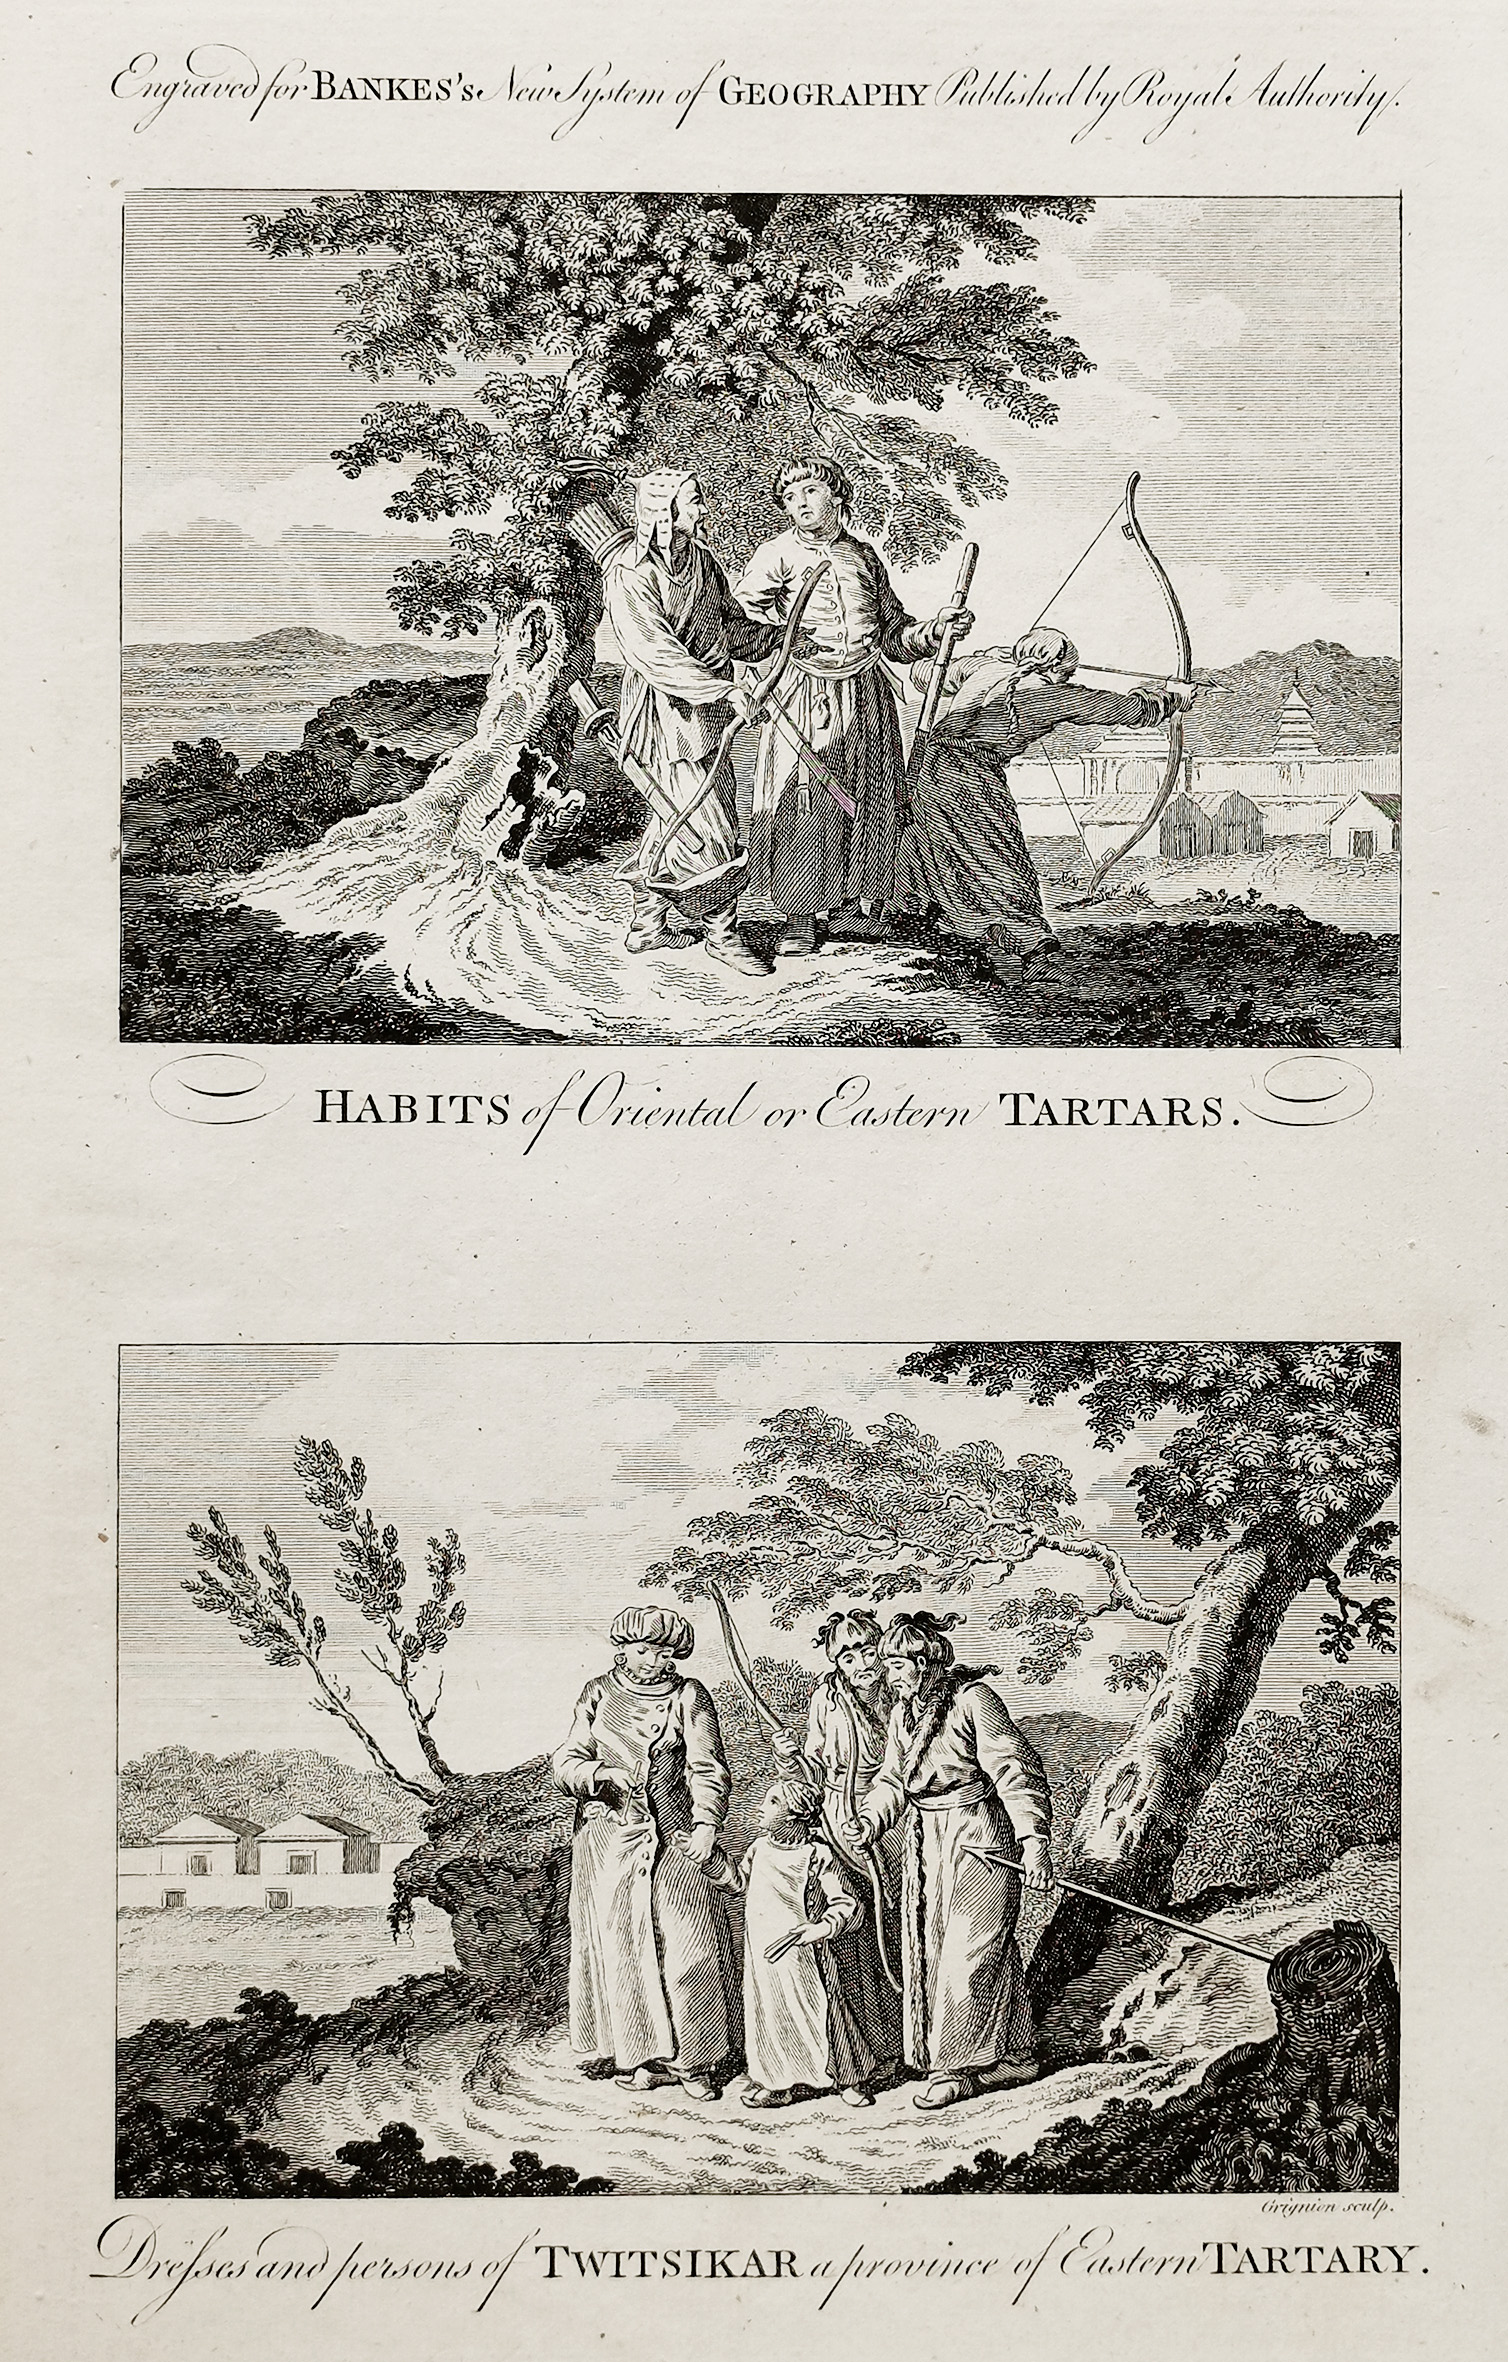 "Habits of Oriental or Eastern Tartars". "Dresses and persons of Twitsikar a province of Eastern Tartary" - Antique Print from 1790